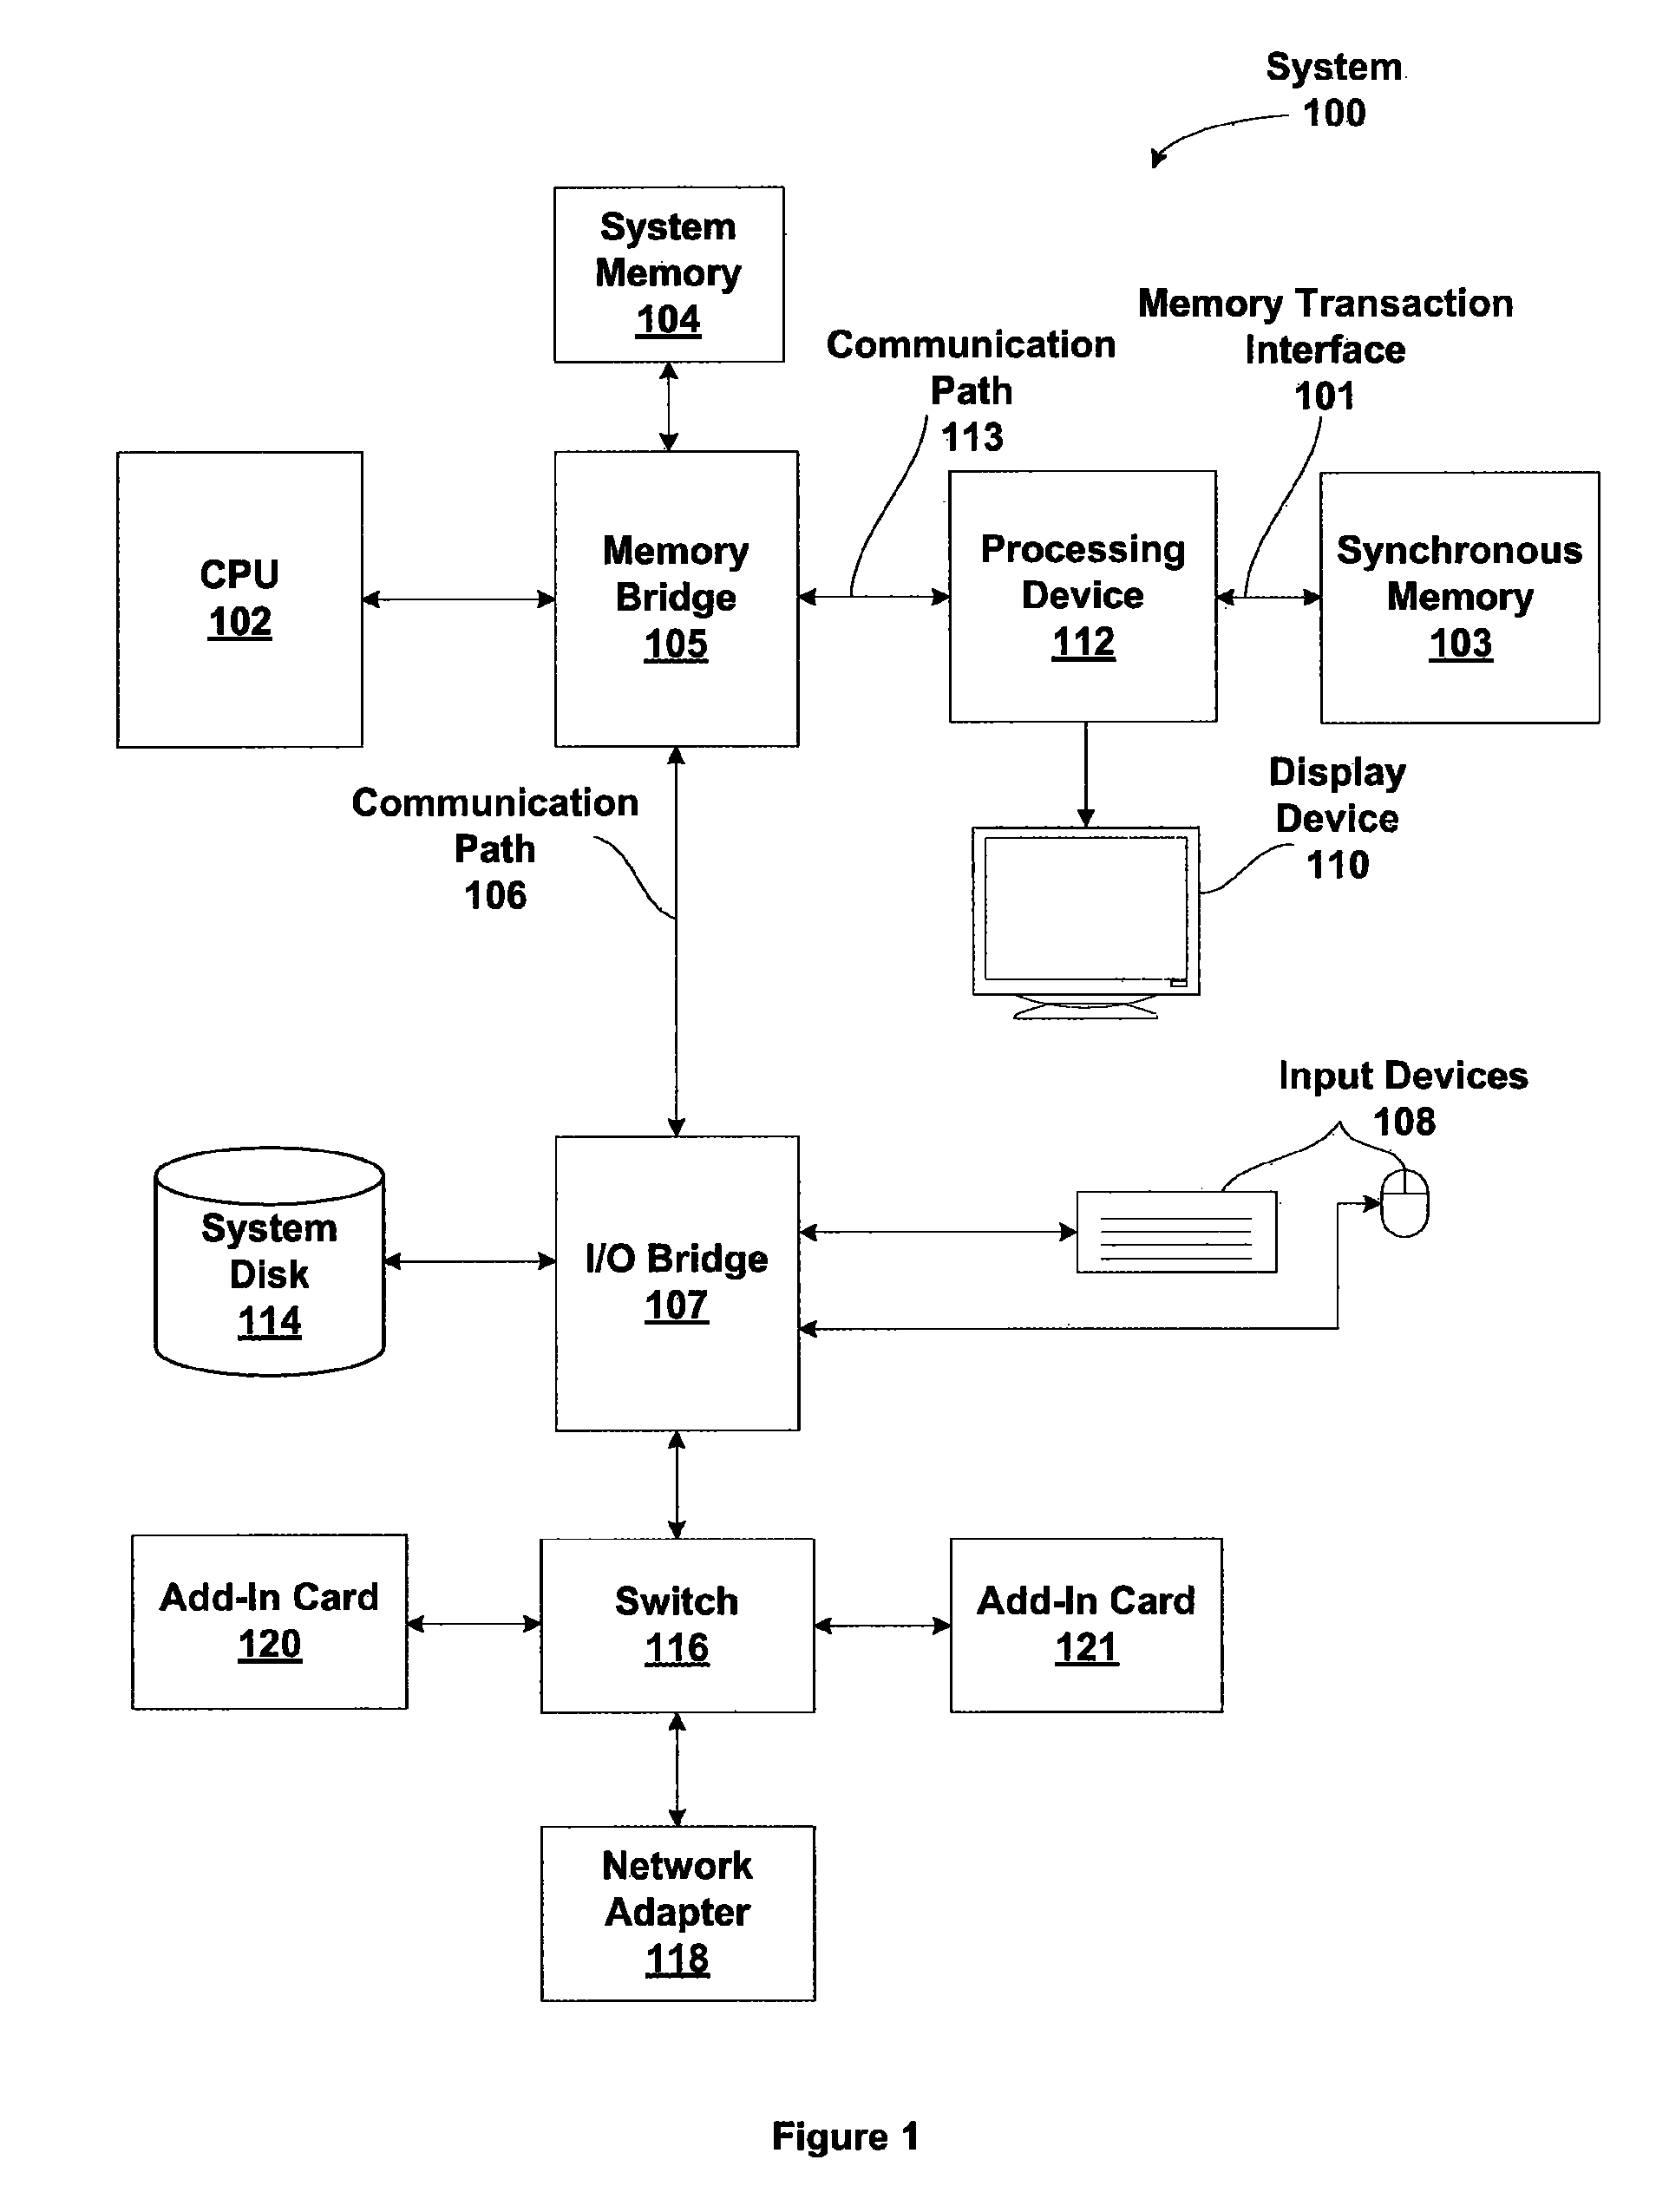 Low latency synchronous memory performance switching using update control